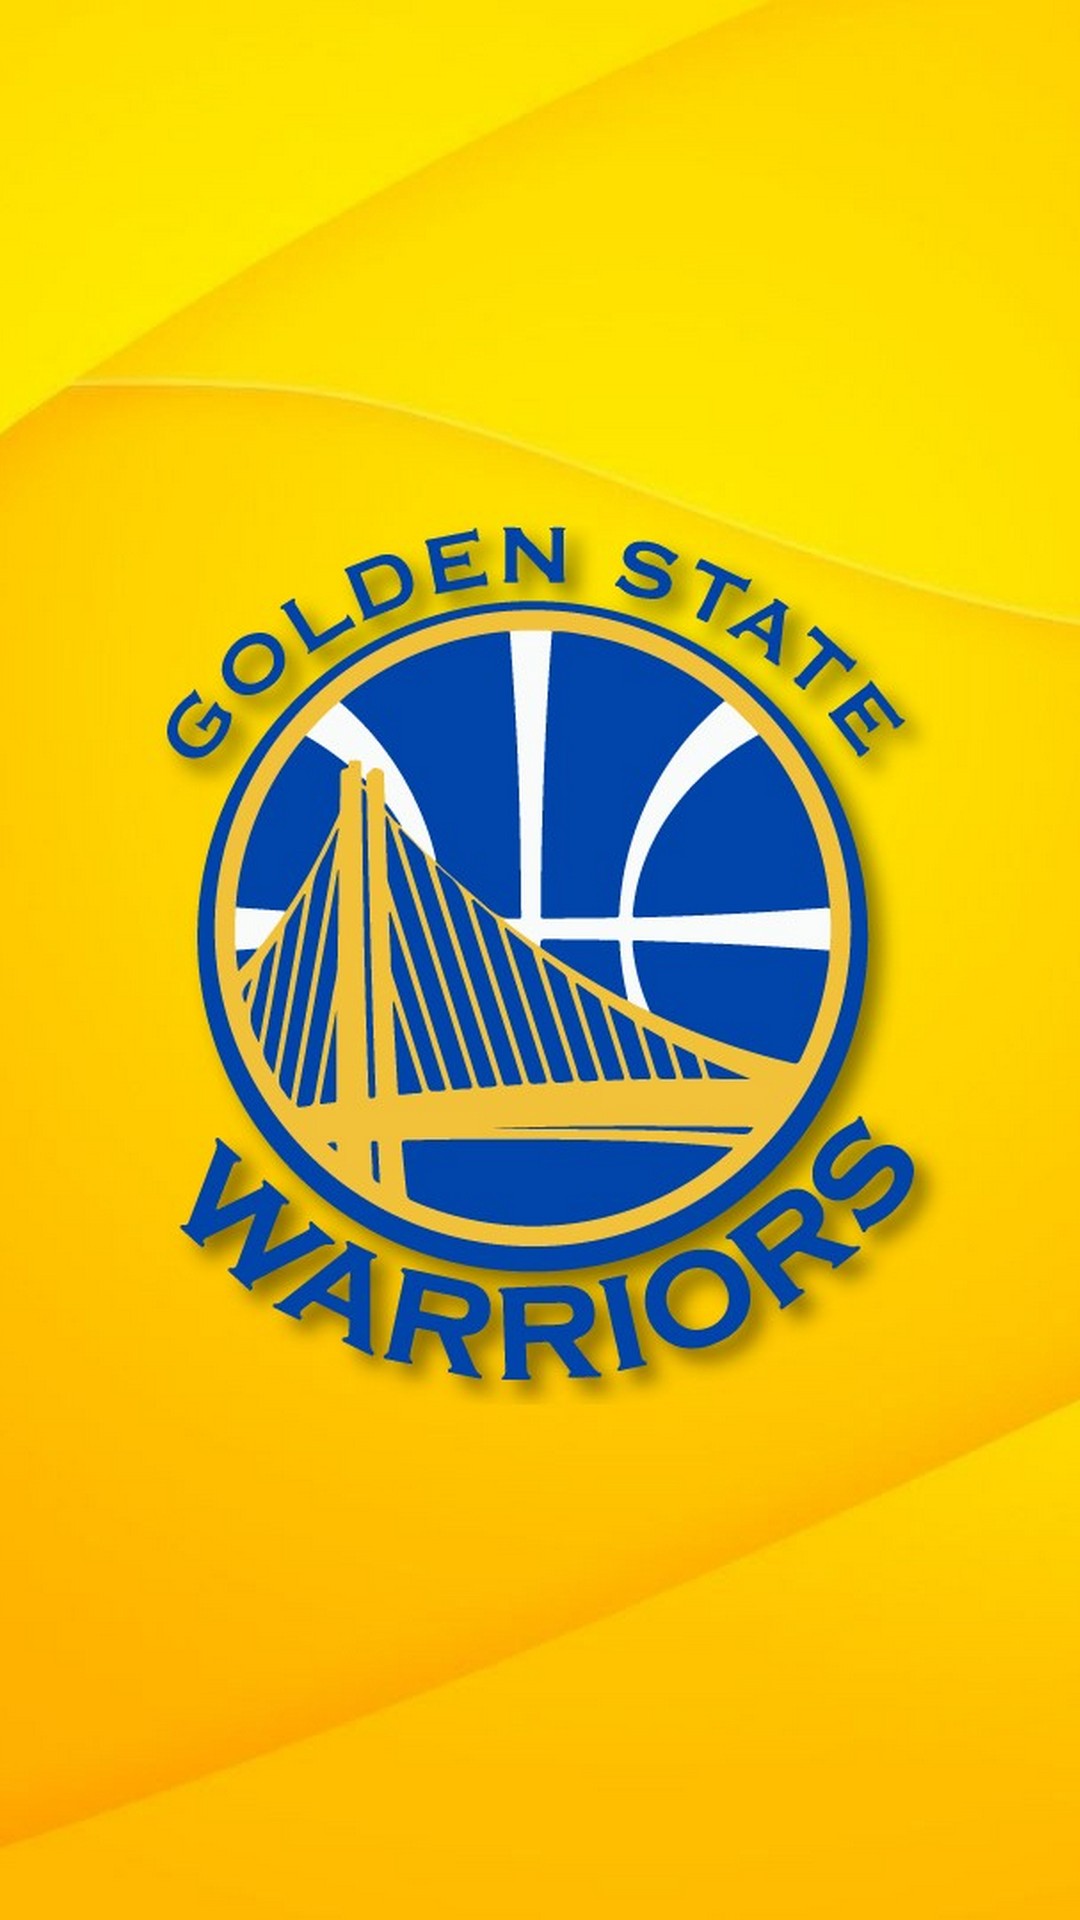 Golden State Warriors Mobile Wallpaper HD with image dimensions 1080x1920 pixel. You can make this wallpaper for your Desktop Computer Backgrounds, Windows or Mac Screensavers, iPhone Lock screen, Tablet or Android and another Mobile Phone device